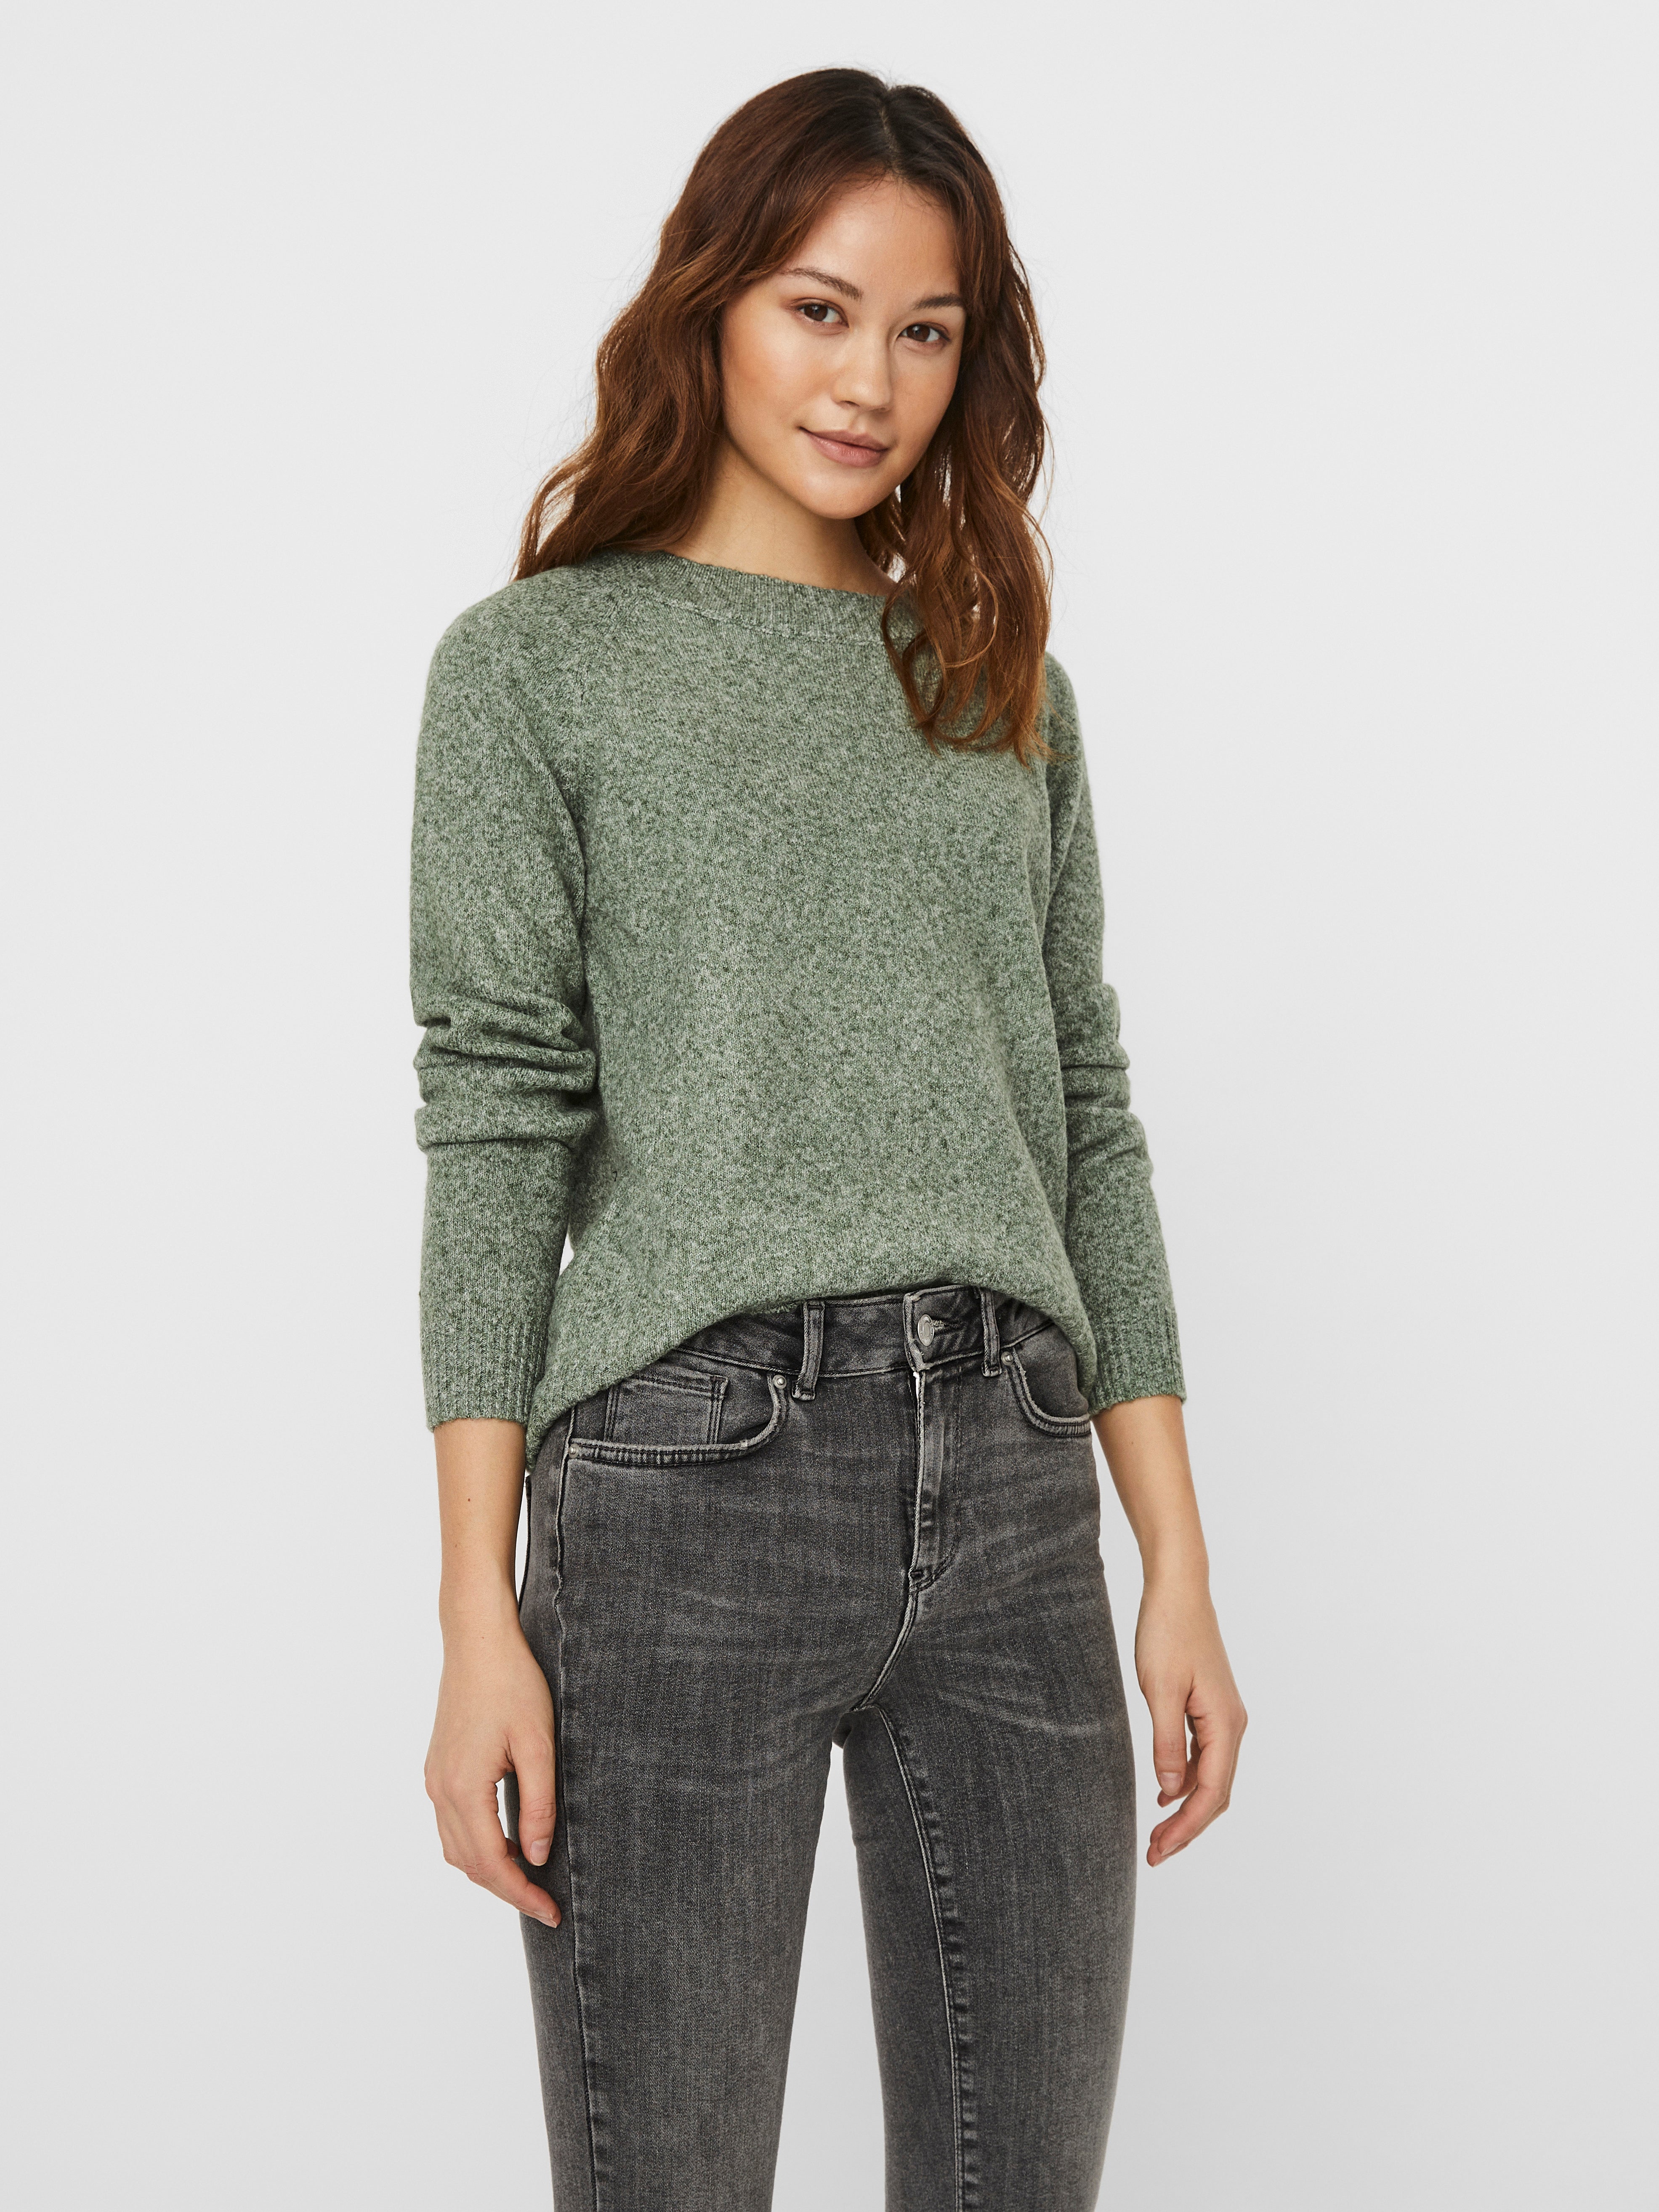 Fashion Sweaters Knitted Sweaters Vero Moda Knitted Sweater light grey-green flecked elegant 